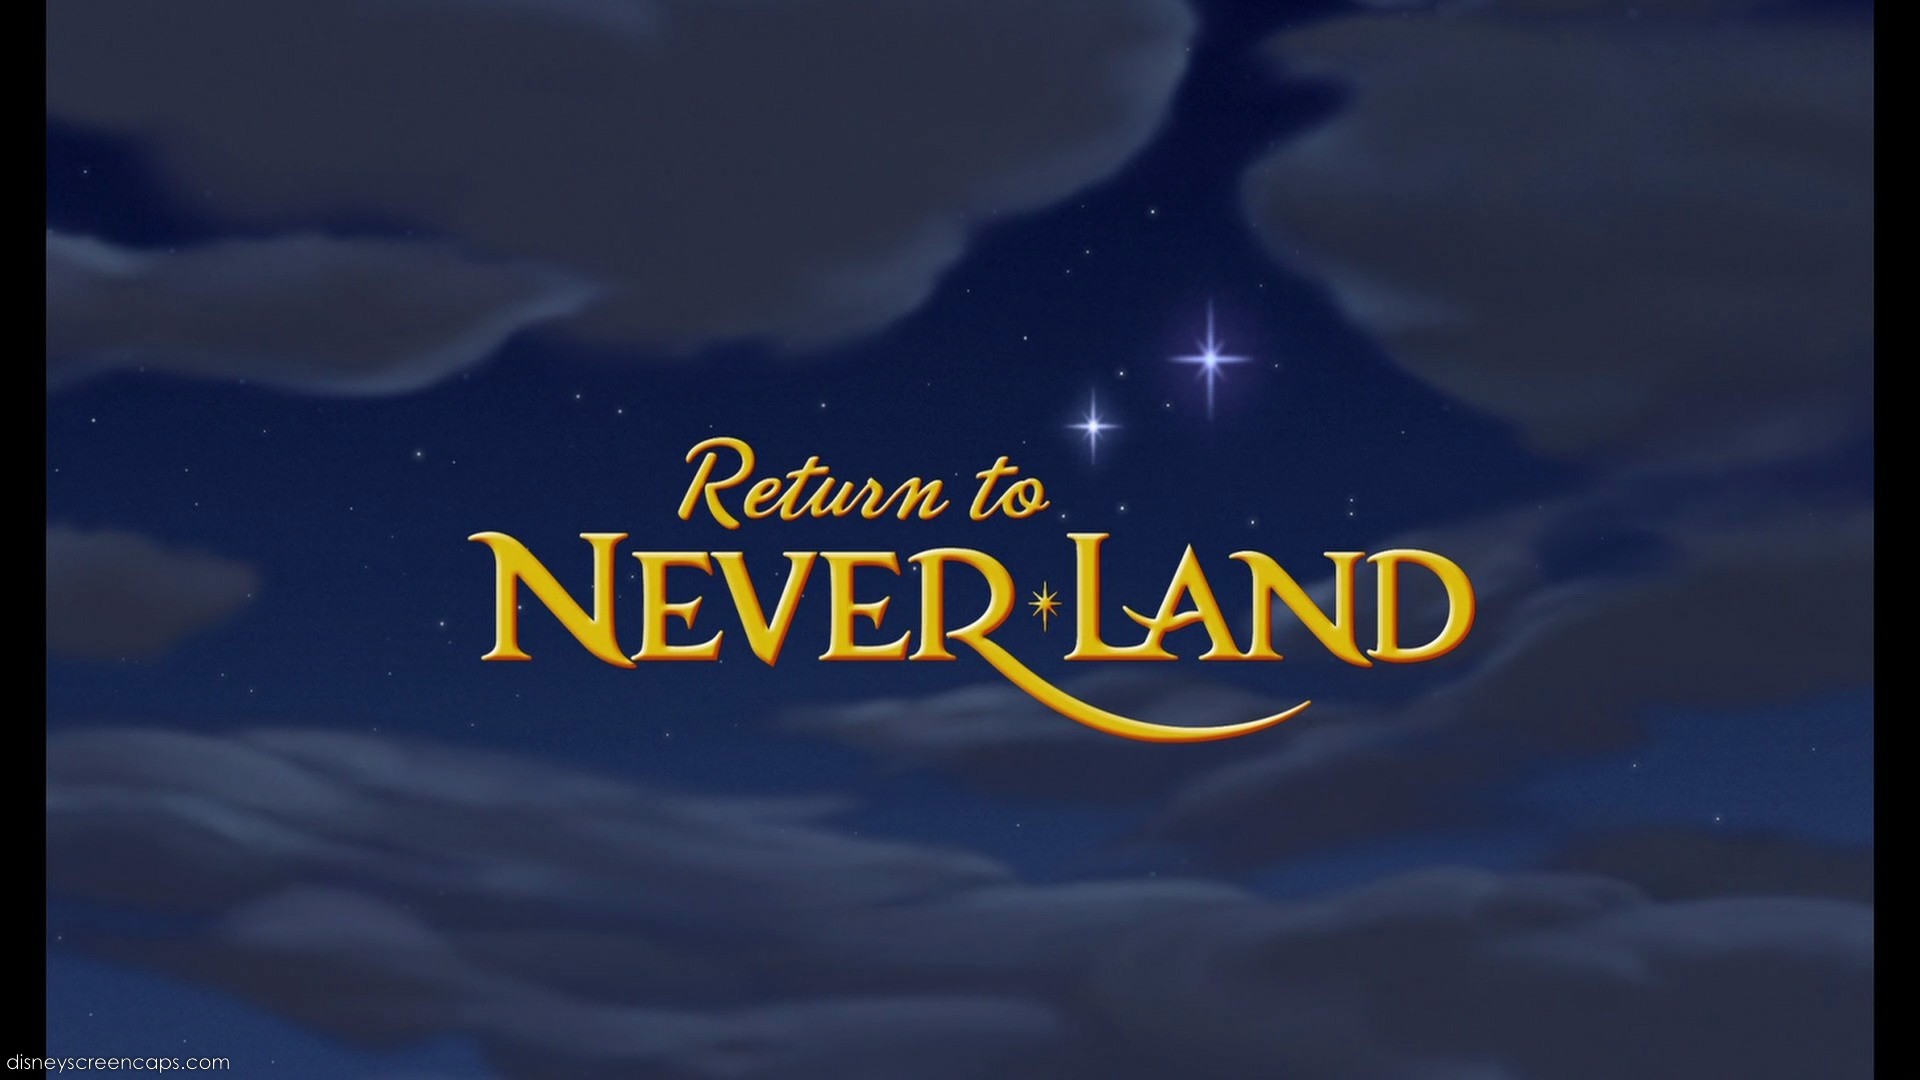 1920x1080 Disney images Return to Neverland HD wallpaper and background photos